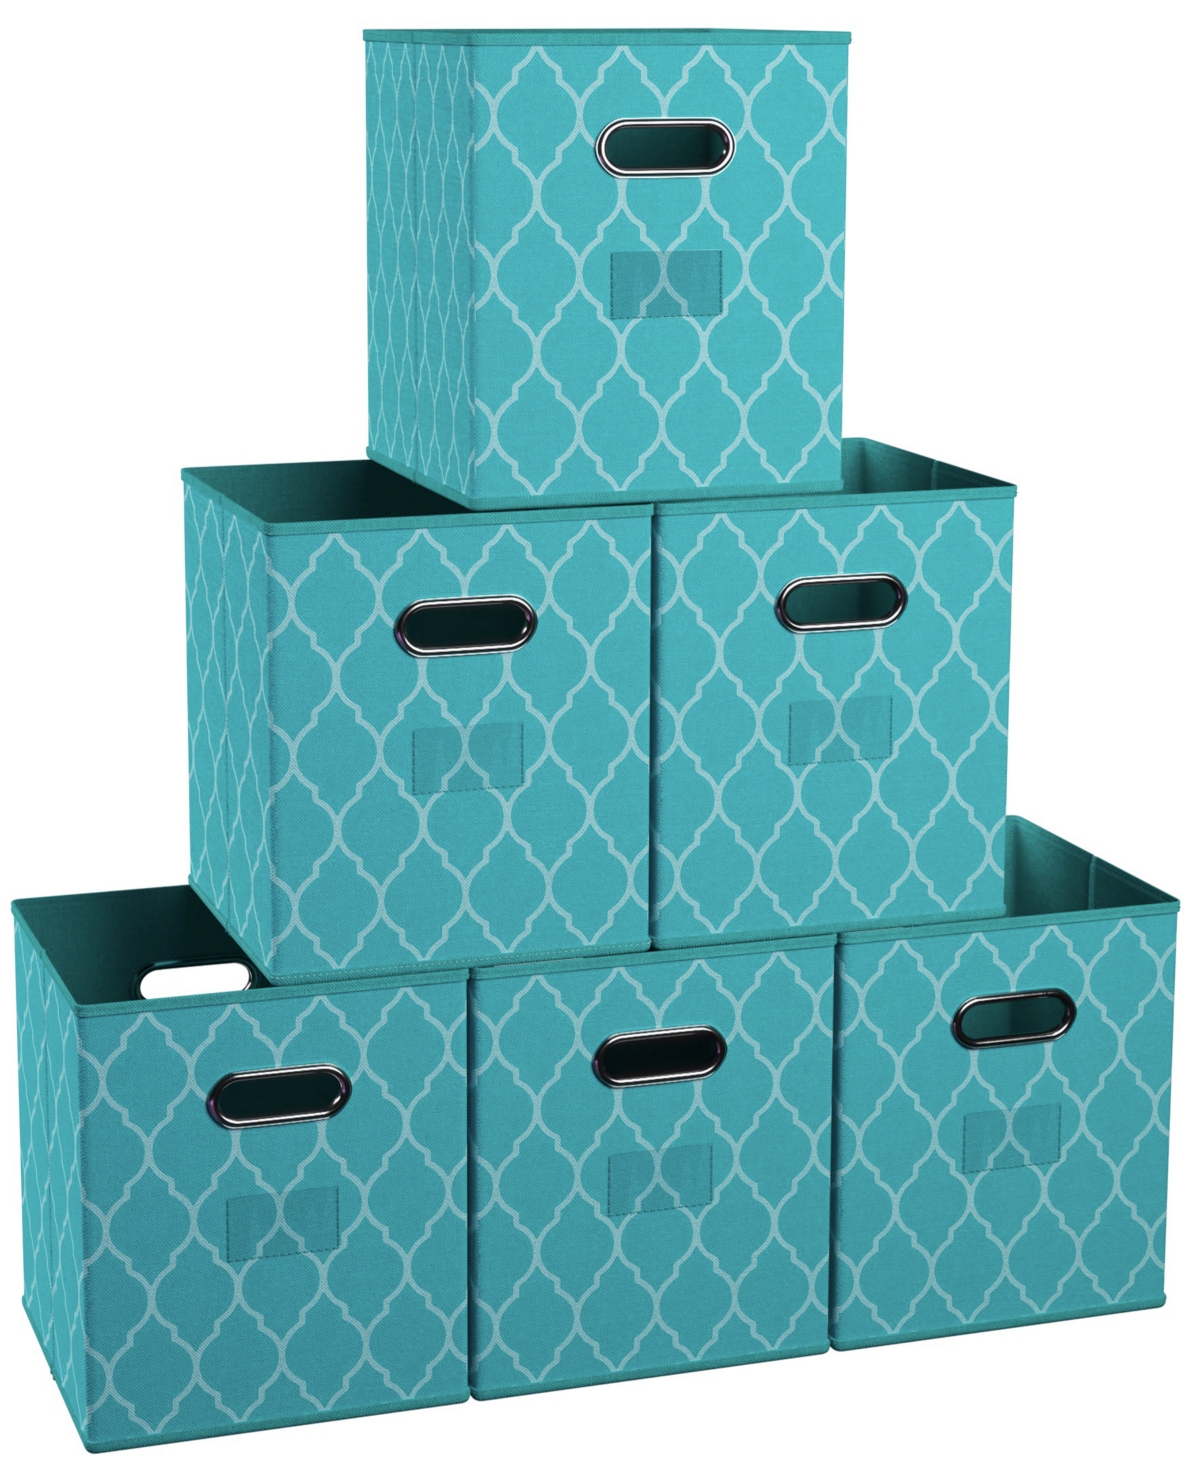 ORNAVO HOME LATTICE FOLDABLE STORAGE CUBE BIN WITH DUAL HANDLES- SET OF 6